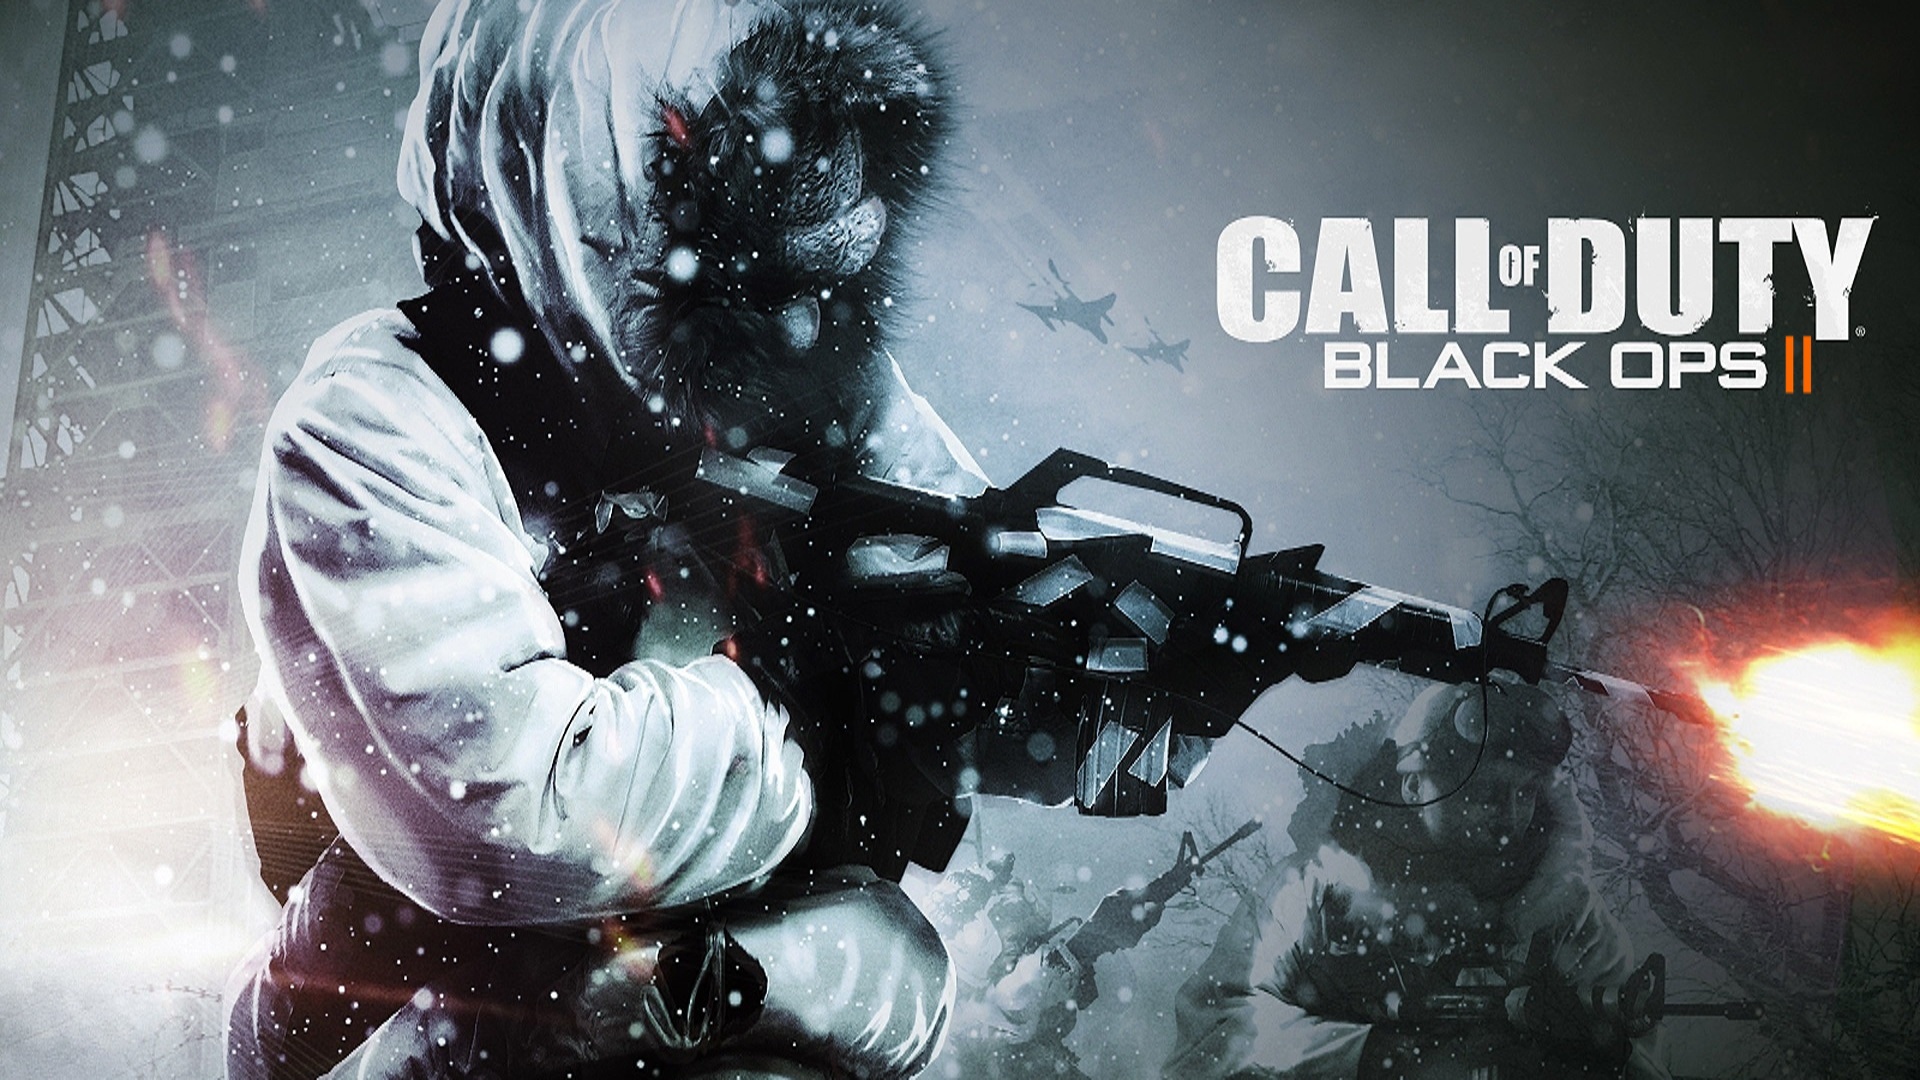 Call of duty black ops zombies wallpaper